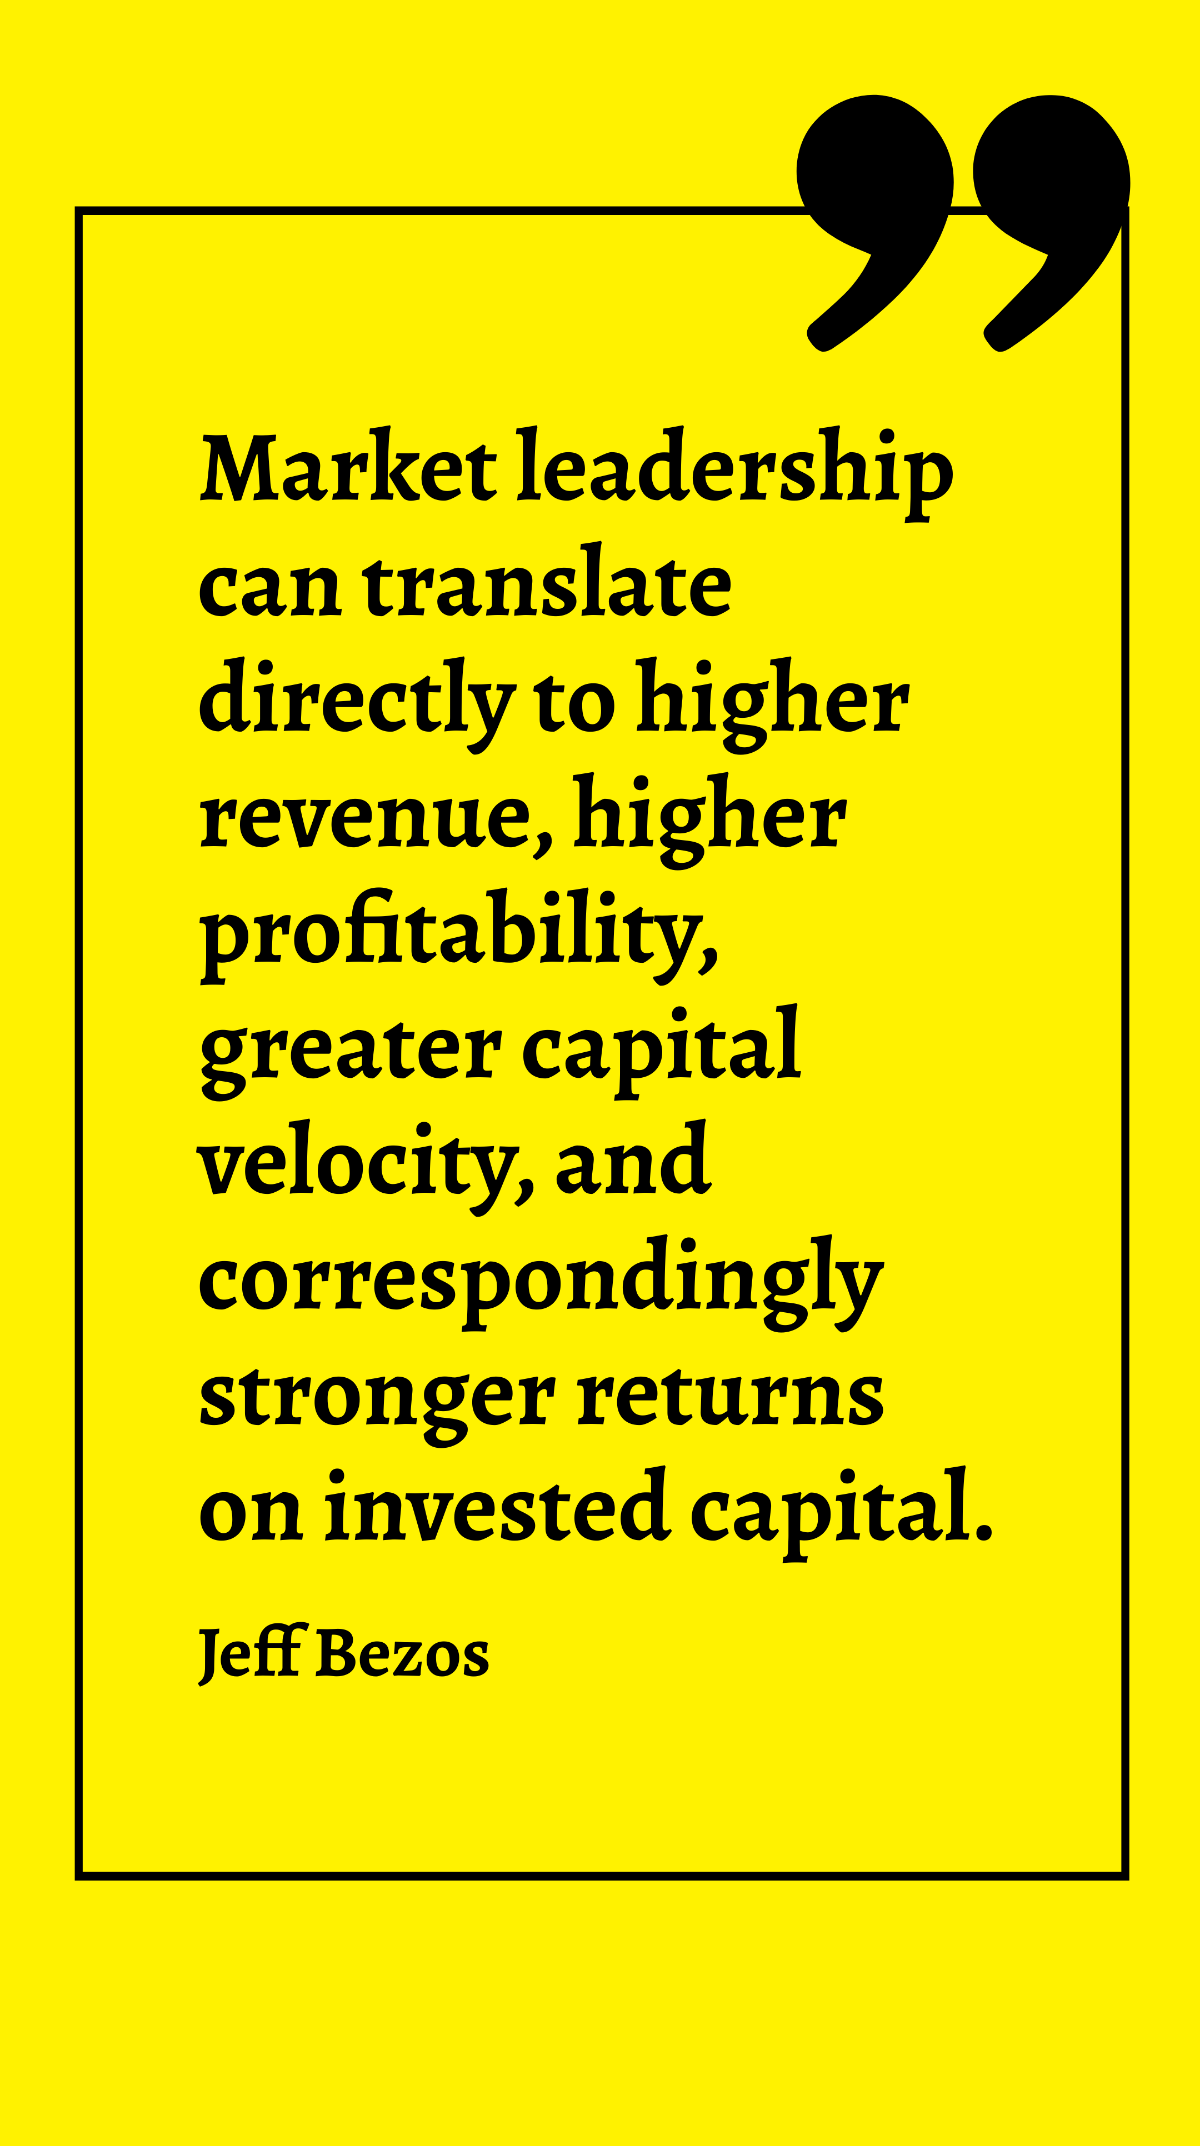 Jeff Bezos - Market leadership can translate directly to higher revenue, higher profitability, greater capital velocity, and correspondingly stronger returns on invested capital. Template